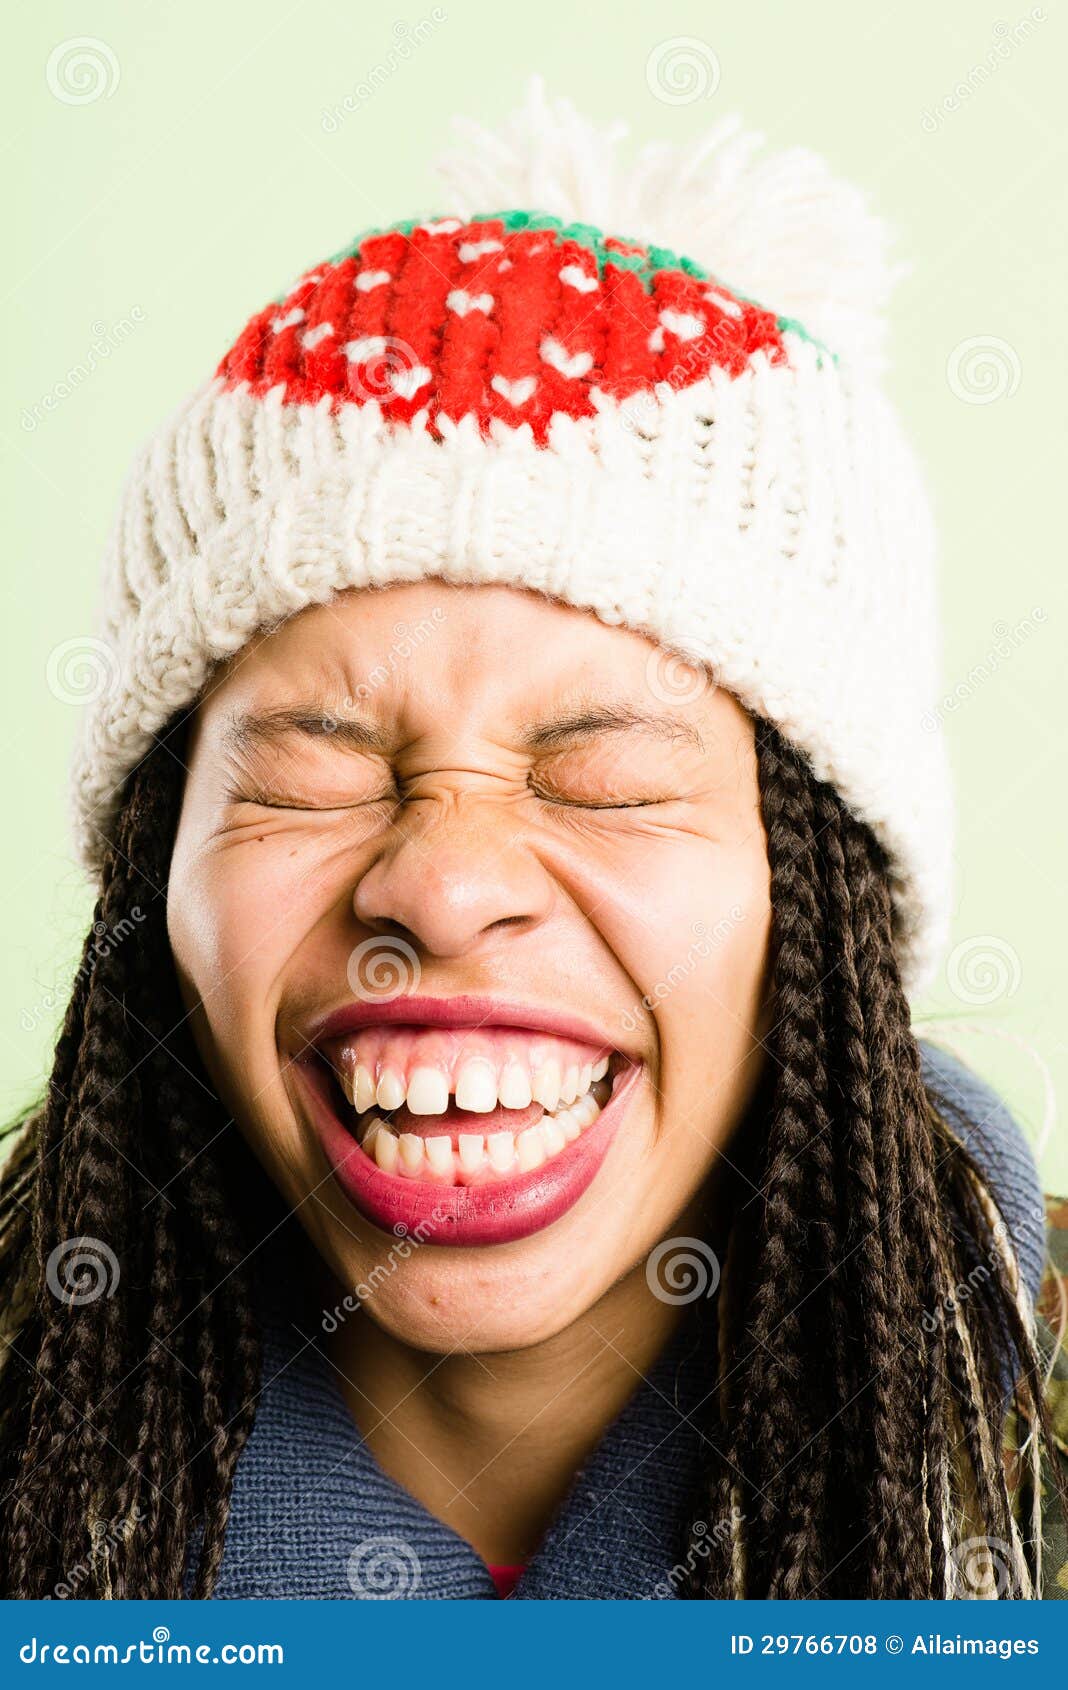 Funny Woman Portrait Real People High Definition Green Backgroun